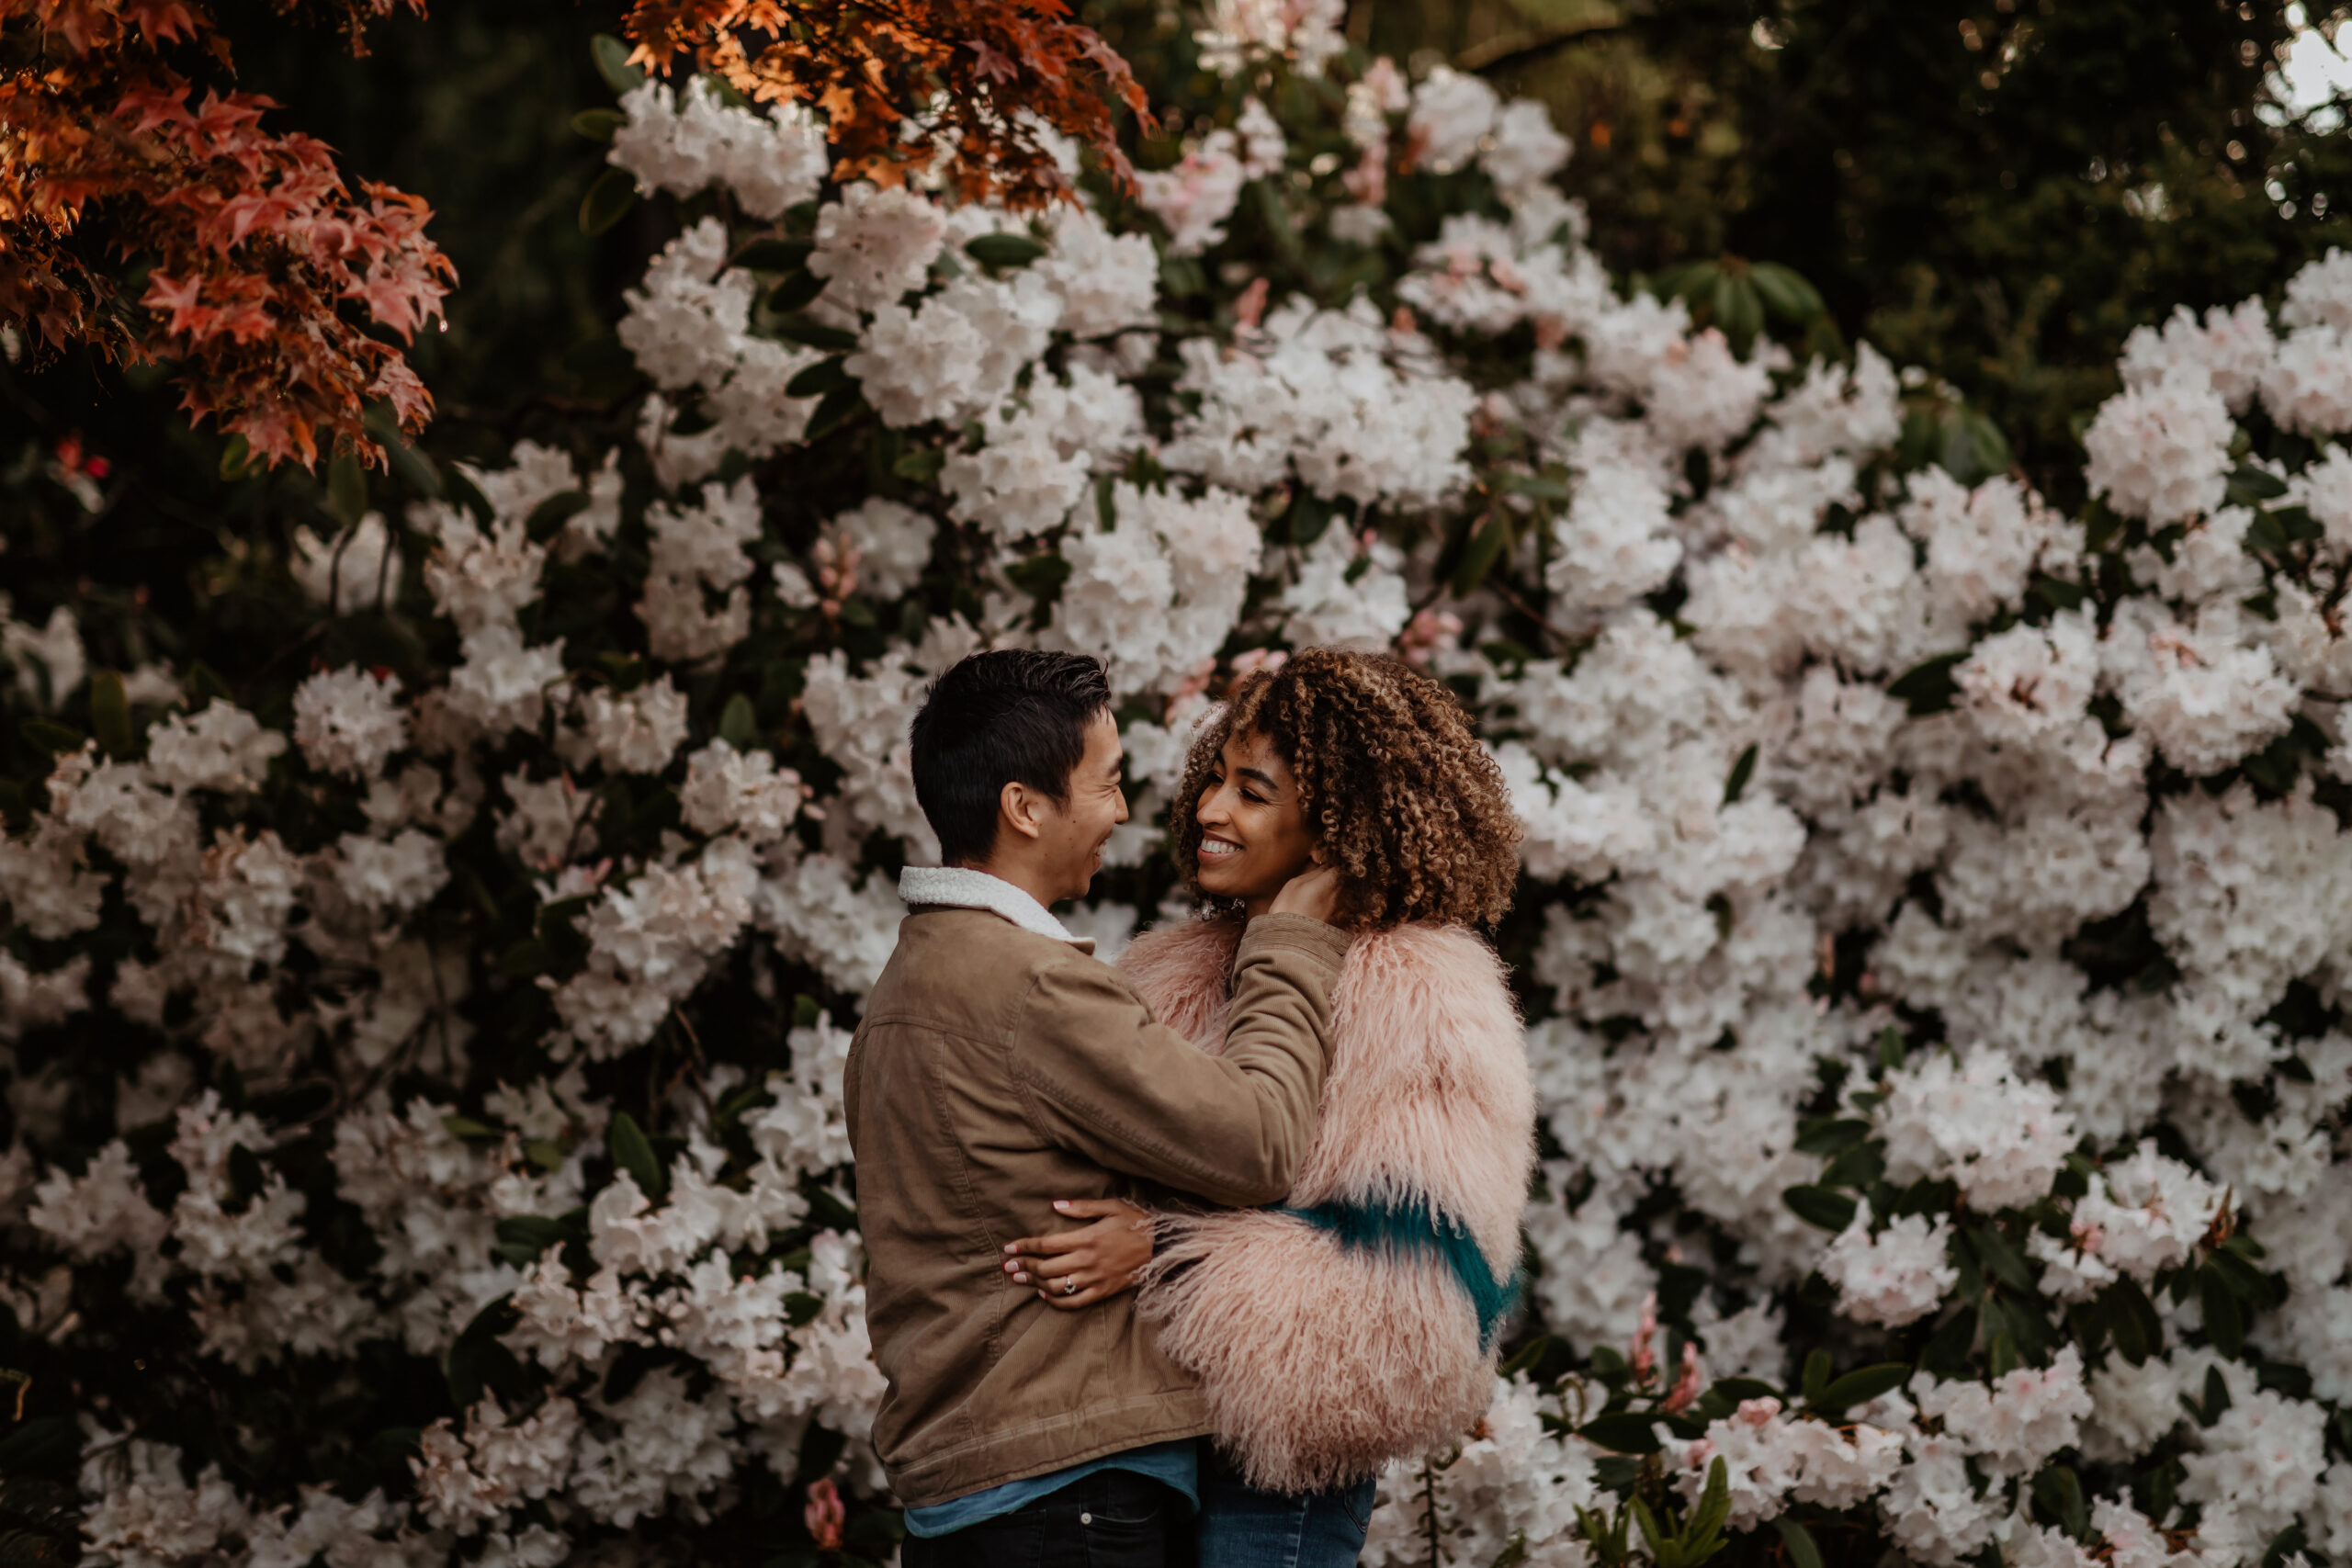 Couple embracing in front of floral bush.